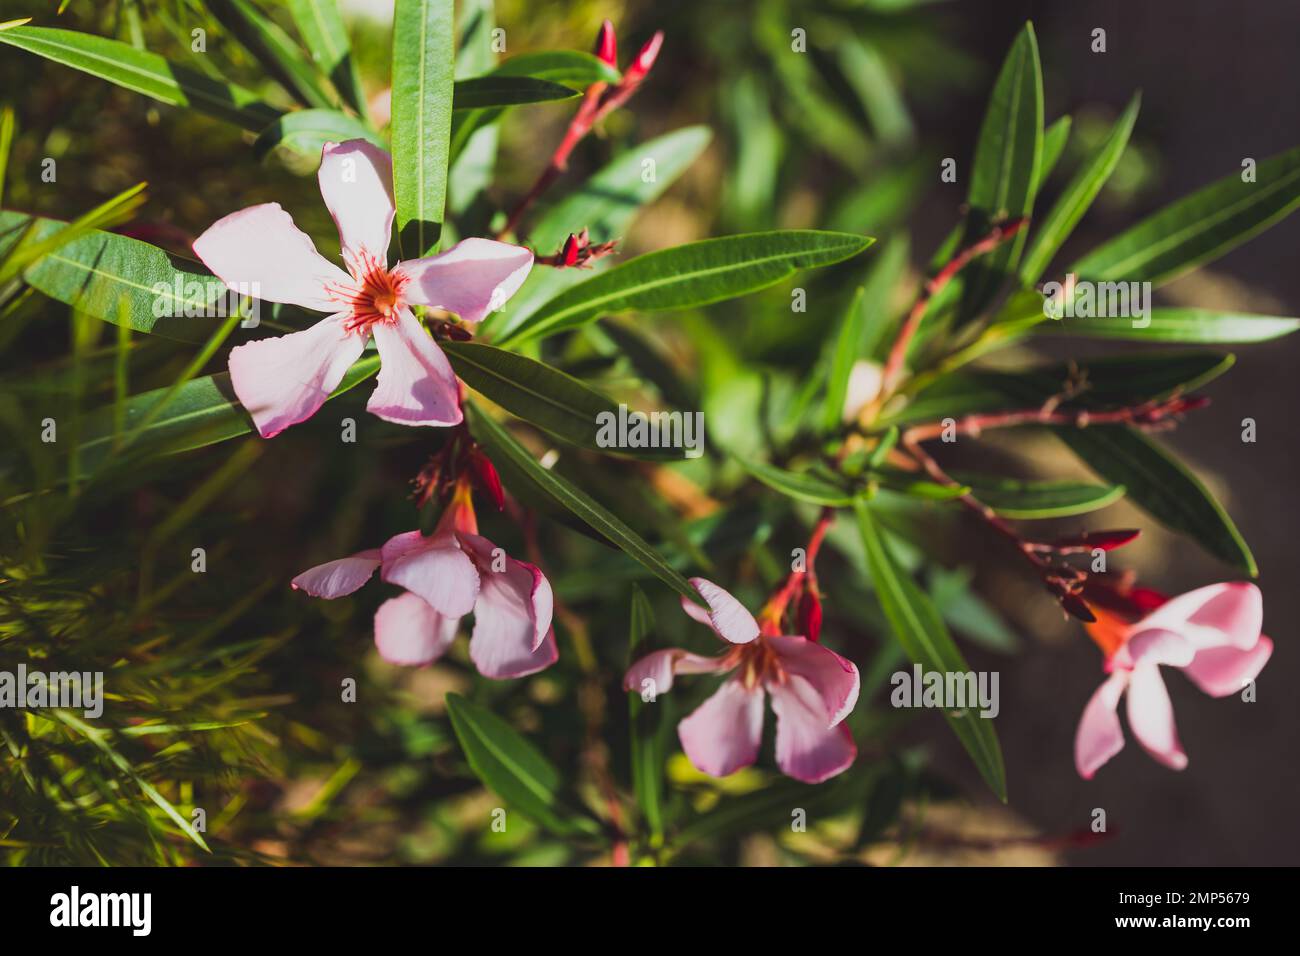 oleander plant with pink flowers outdoor in sunny backyard, close-up shot at shallow depth of field Stock Photo